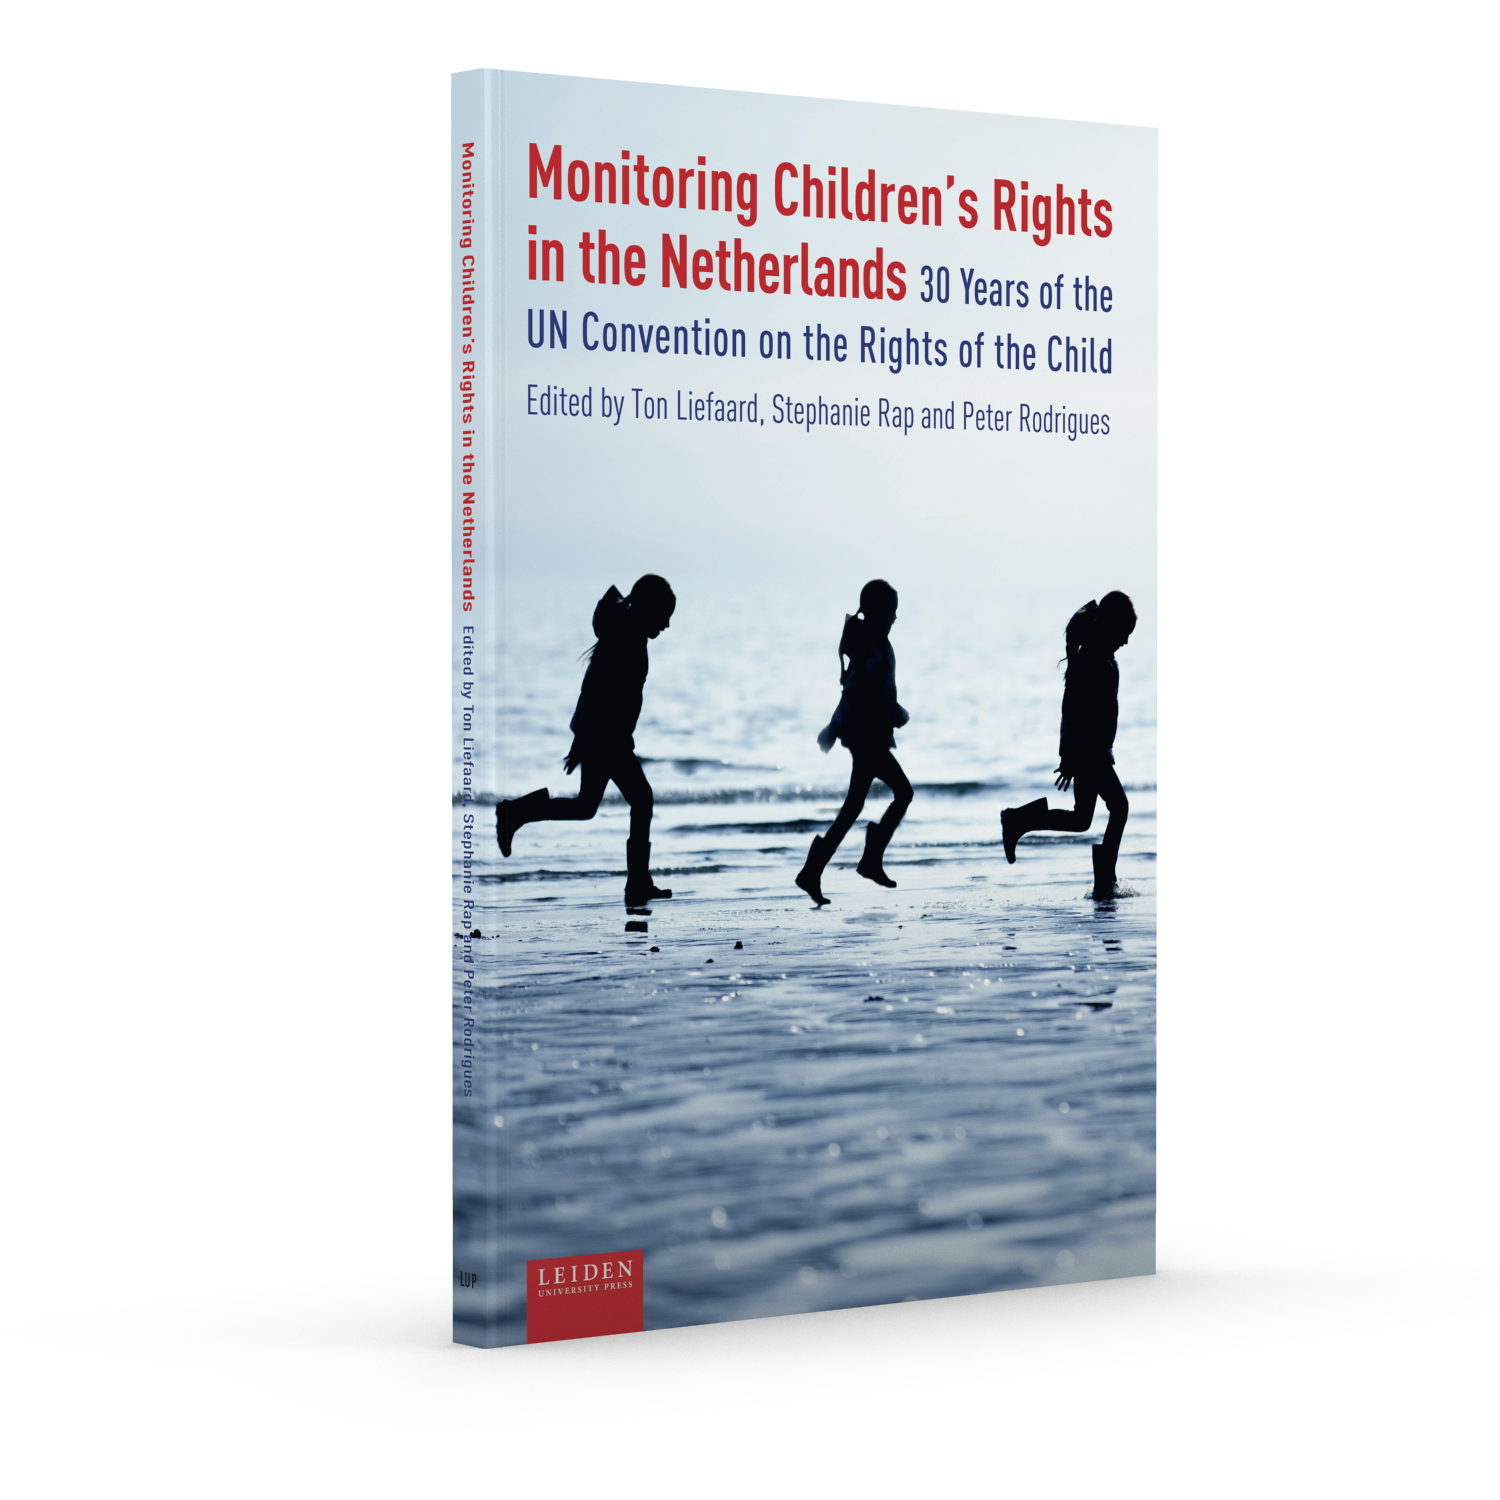 Monitoring Children’s Rights in the Netherlands